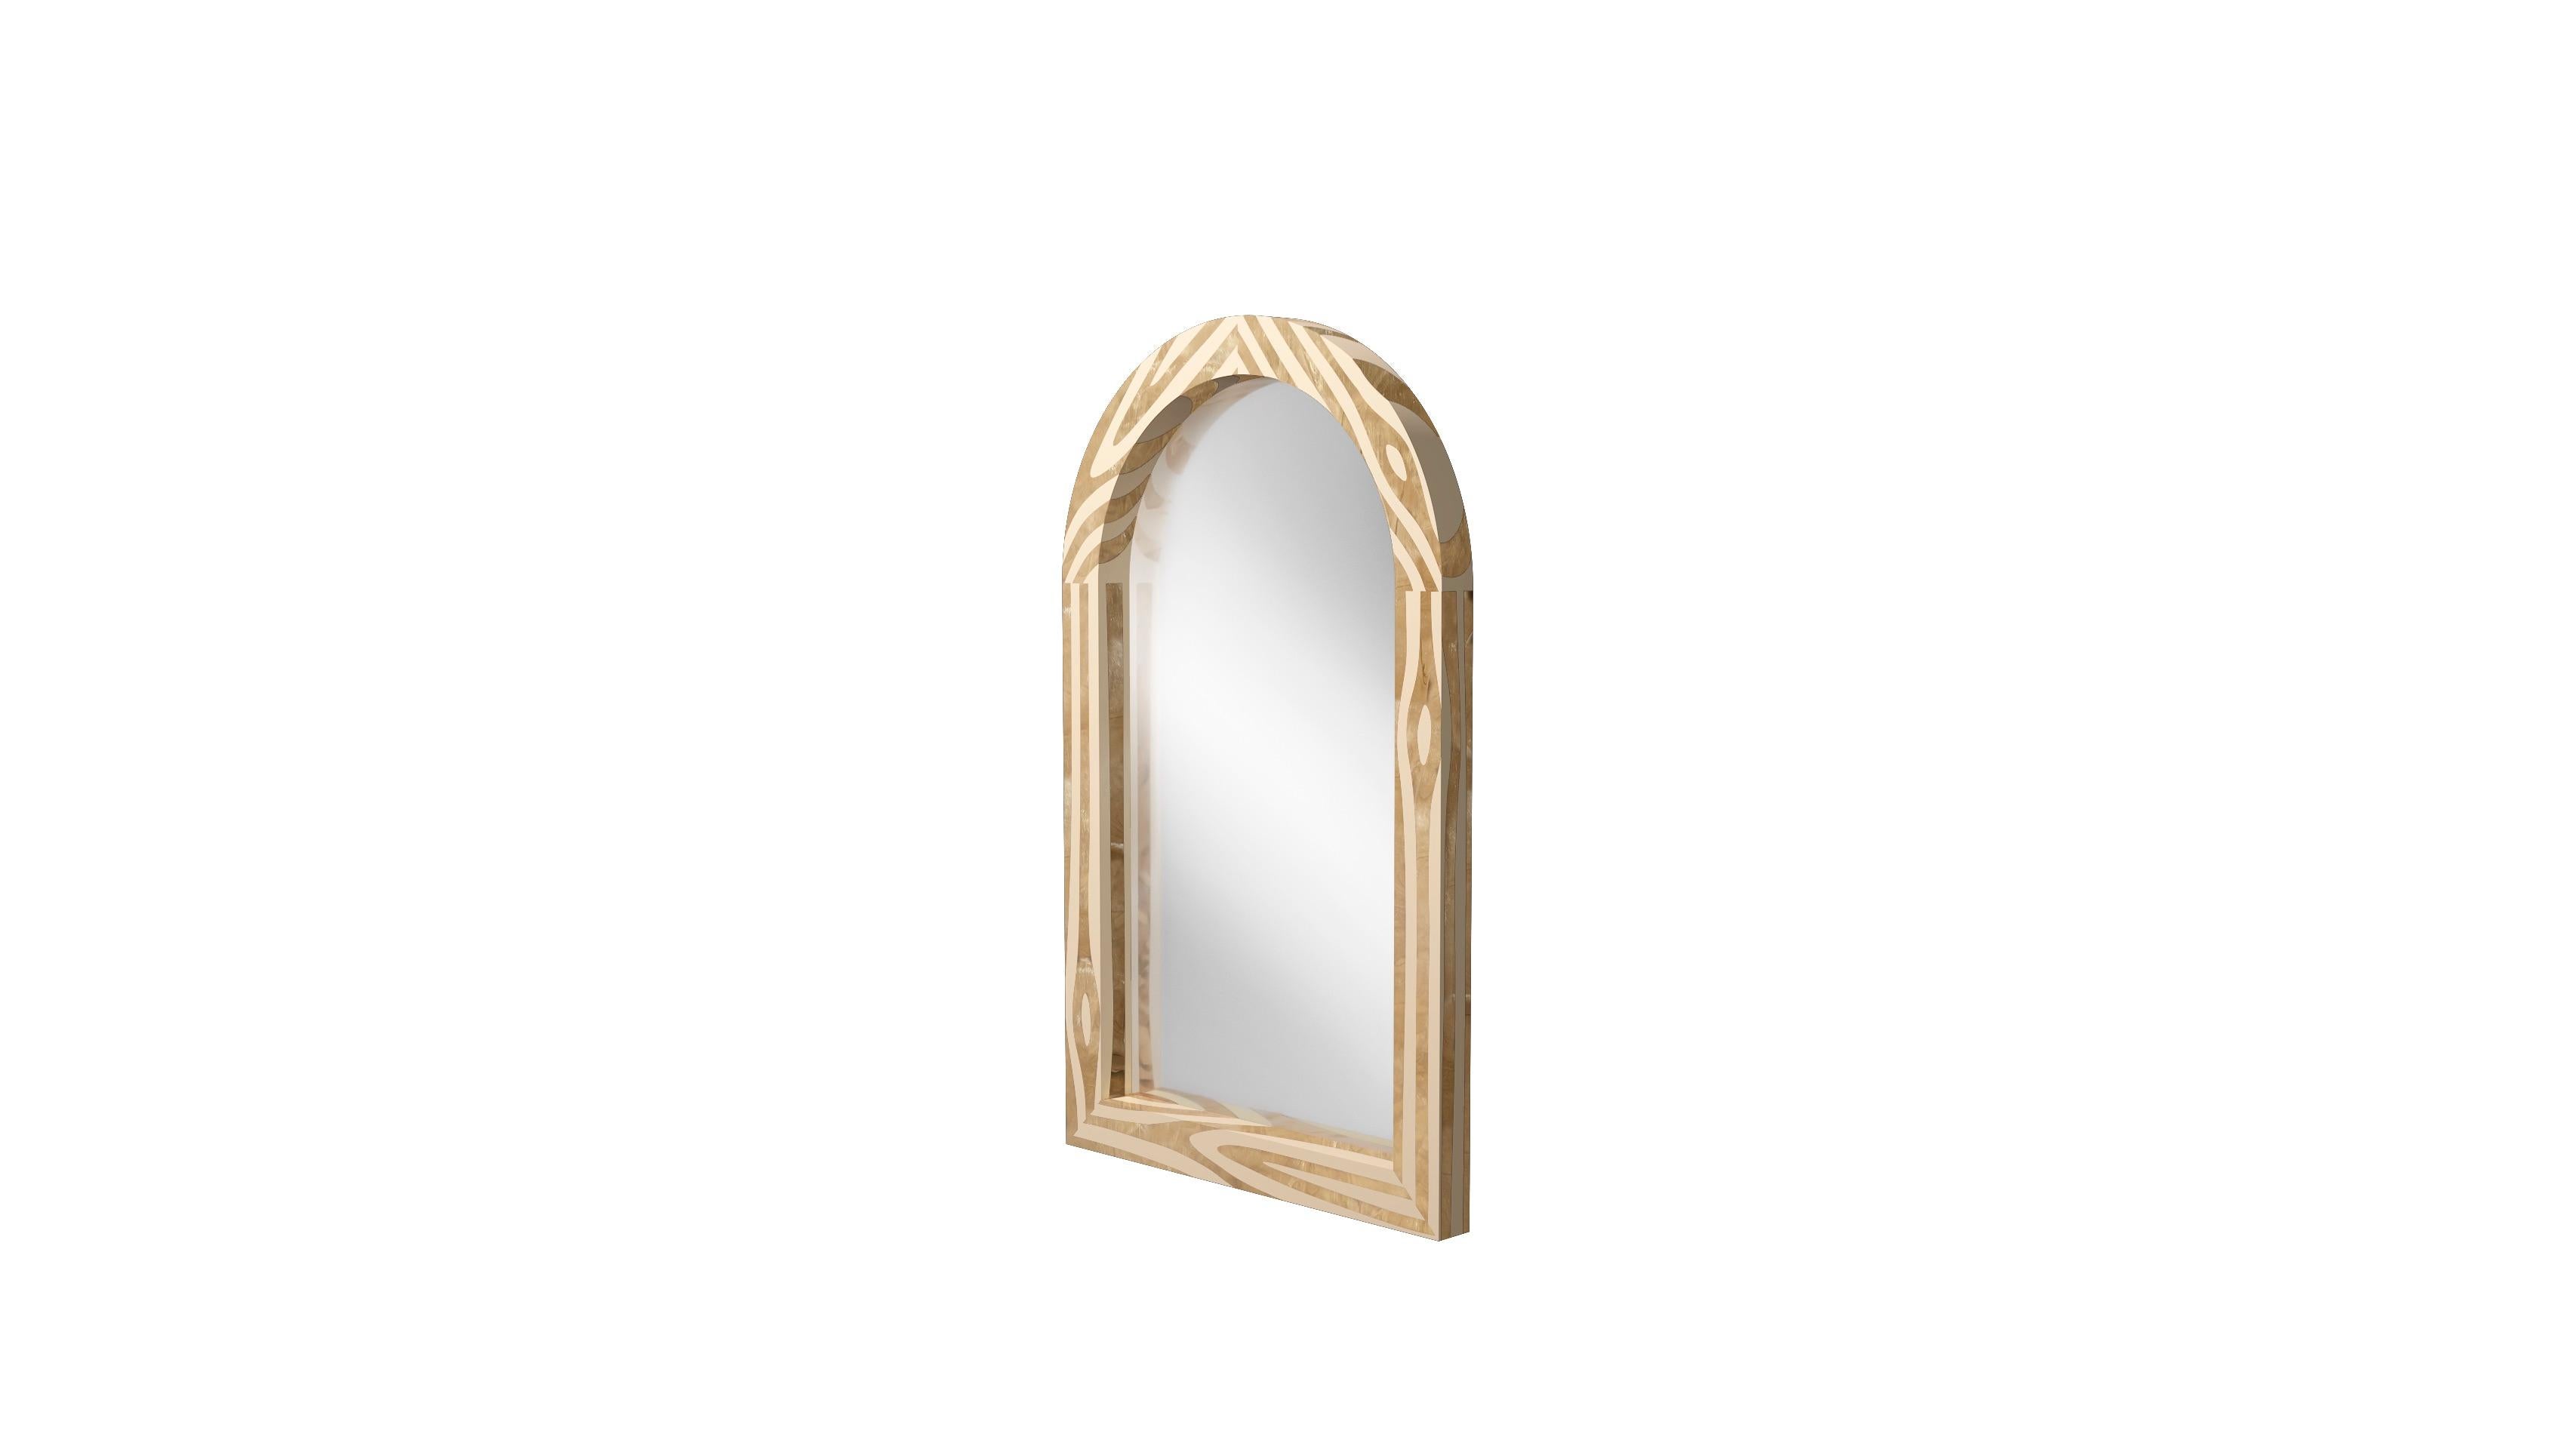 Forest wall console mirror with brass inlay by Marcantonio, is an arched mirror, and its frame has brass inlay resembling the beauty of natural wood. 

For his debut creations, Marcantonio introduced “Vegetal Animal”, a concept that evokes strong